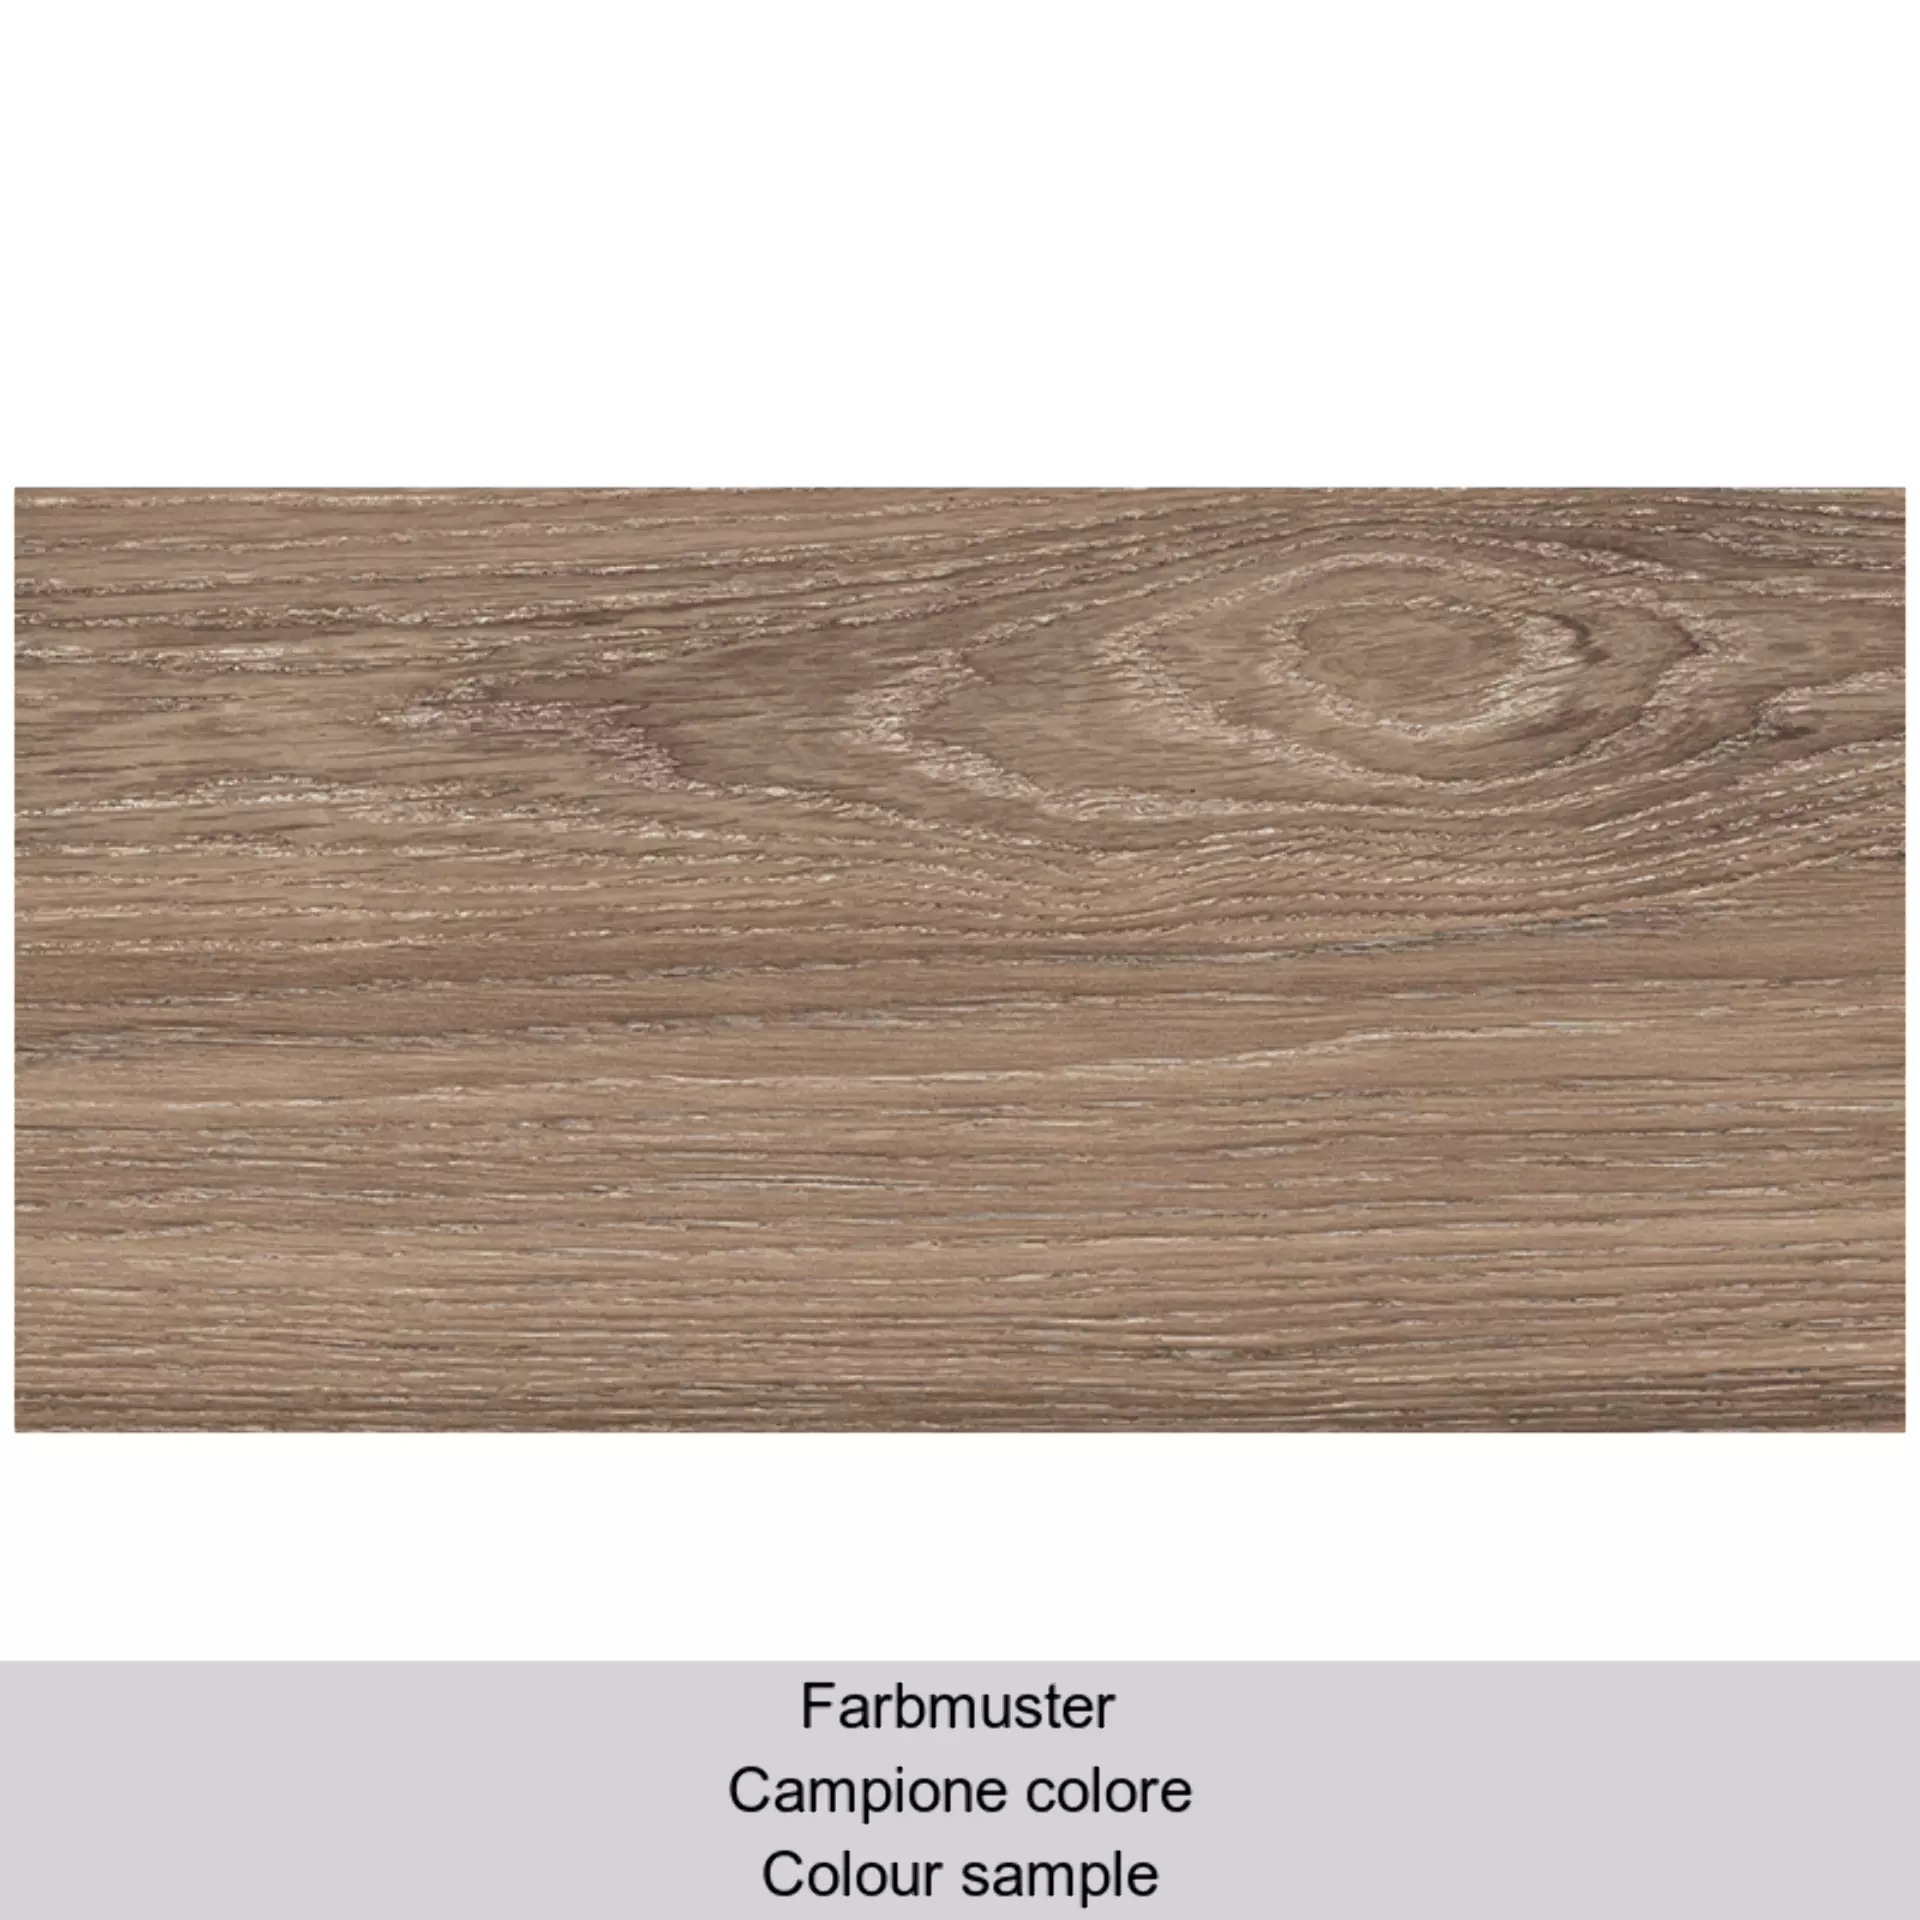 ABK Eco-Chic Avana Naturale Mix Sizes PF60006773 30x60cm rectified 8,5mm